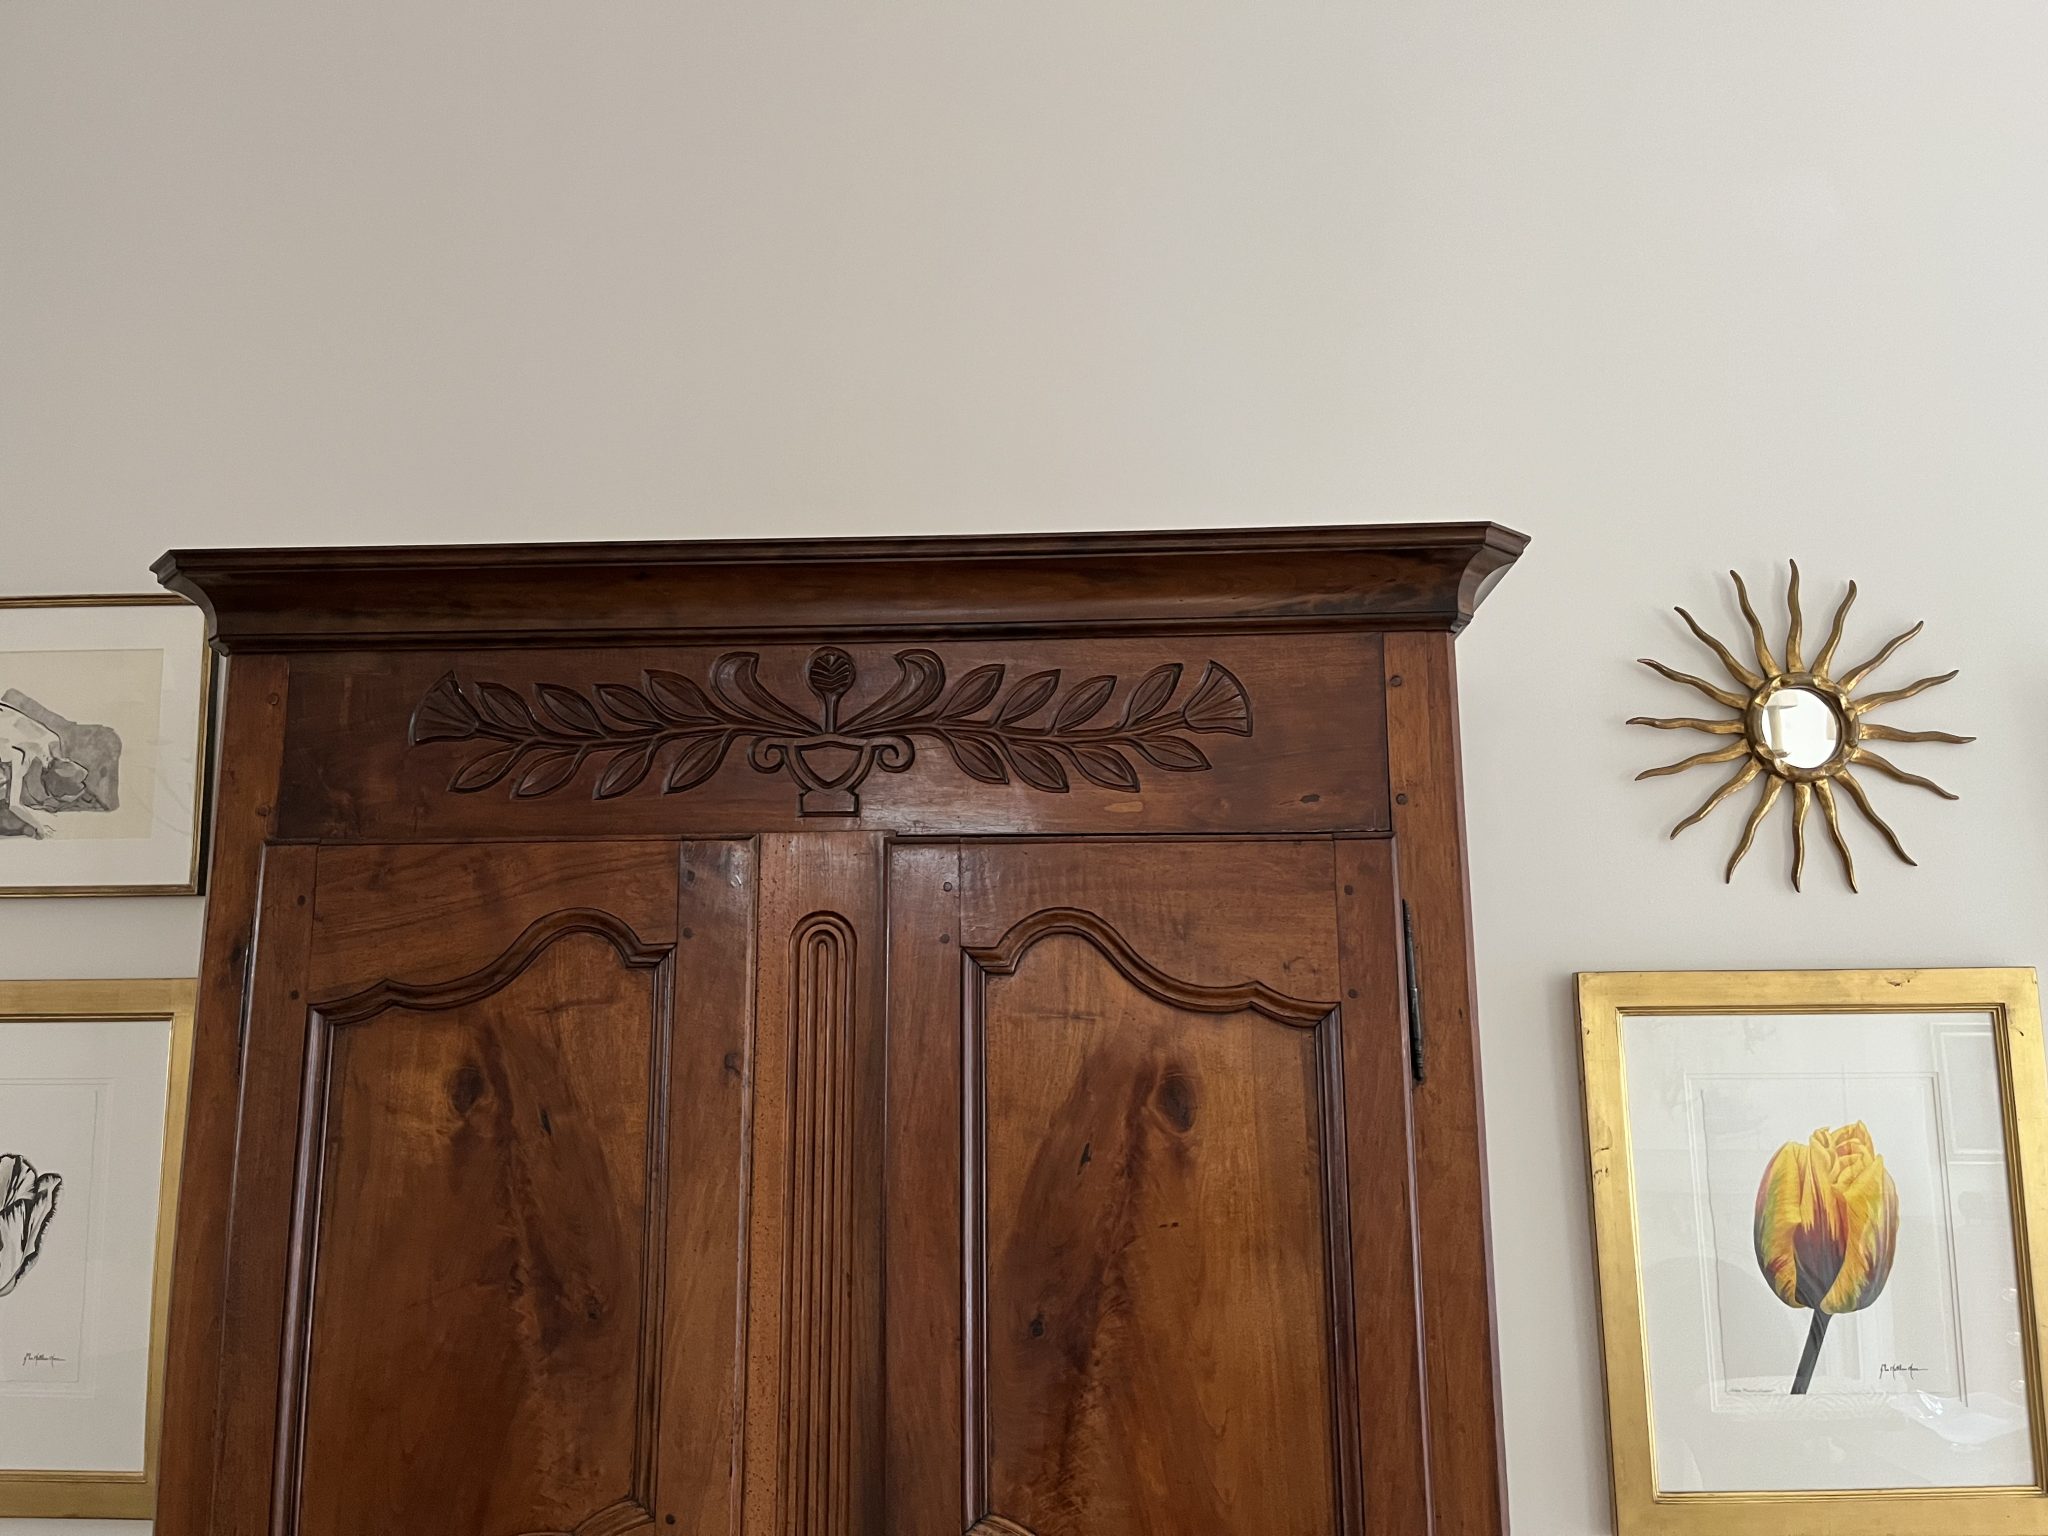 Replacement cornice for antique armoire.  
Material -cherry   3 piece custom crown   
Finish- bleached wood, Lockwood stain (walnut/English brown mahogany),thinned amber shellac, semi gloss lacquer.